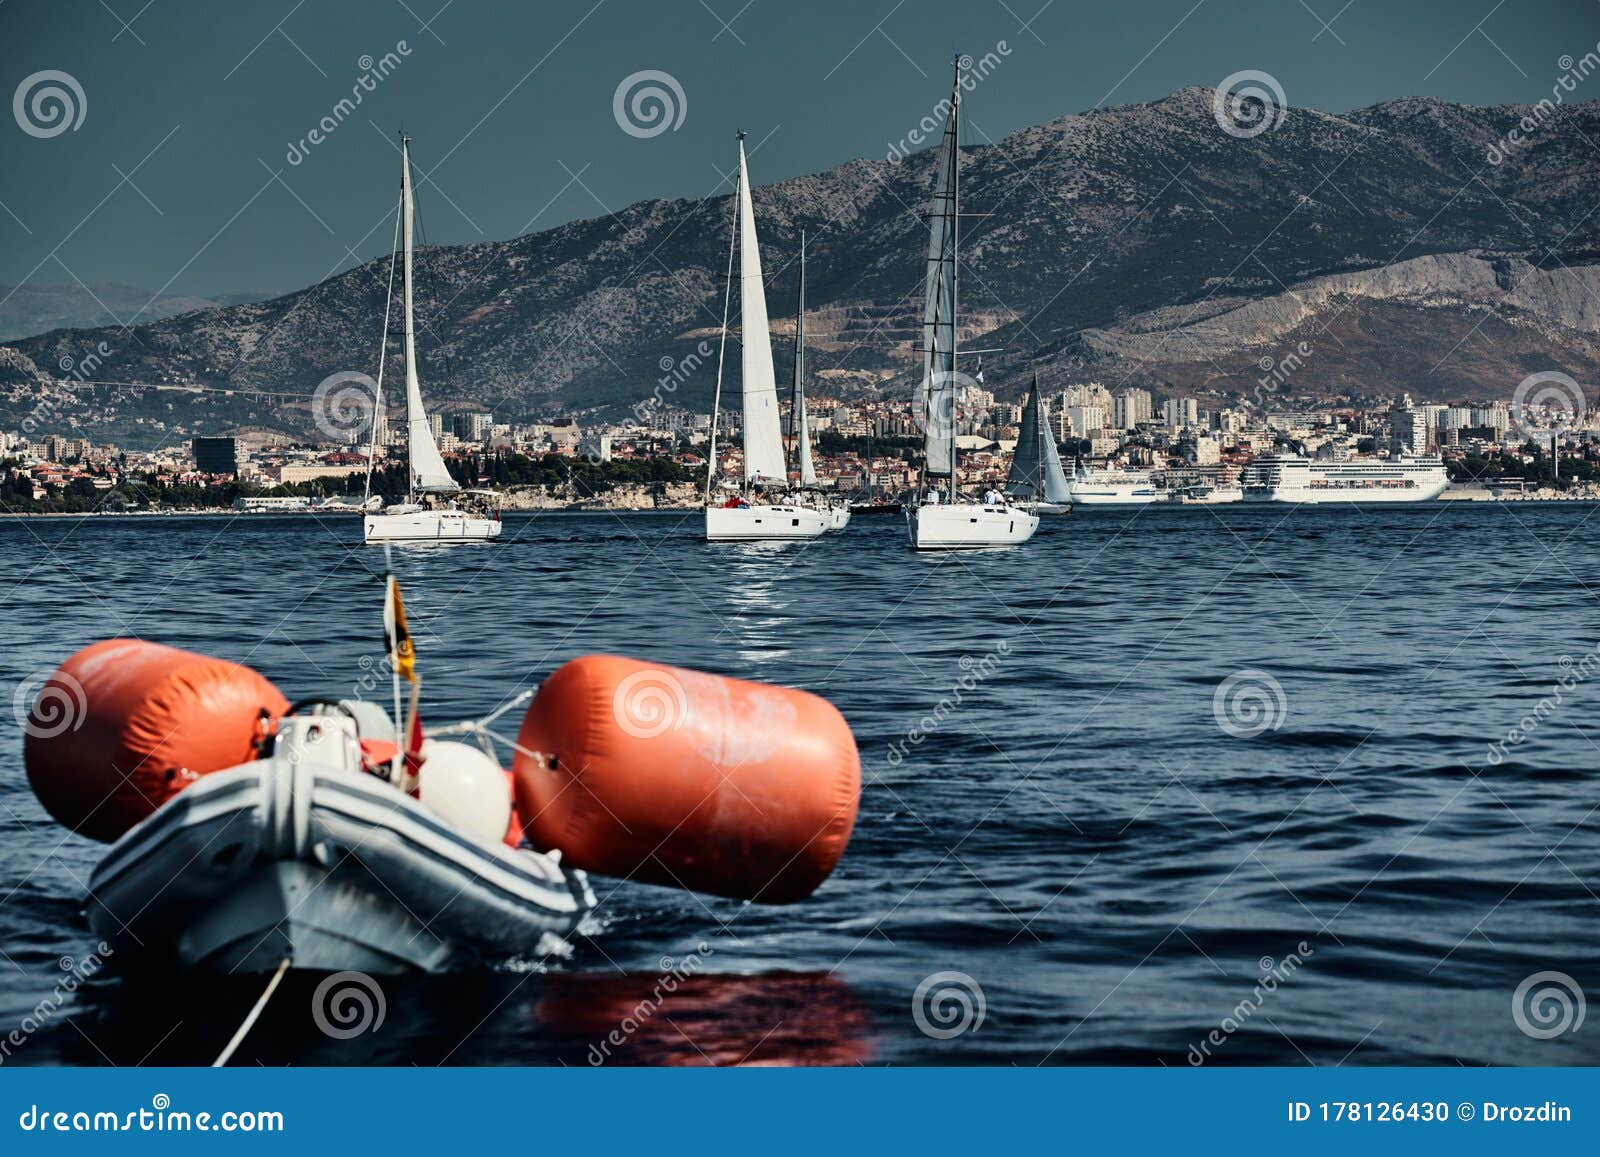 The Rubber Boat of Organizers of a Regatta with the Judge and